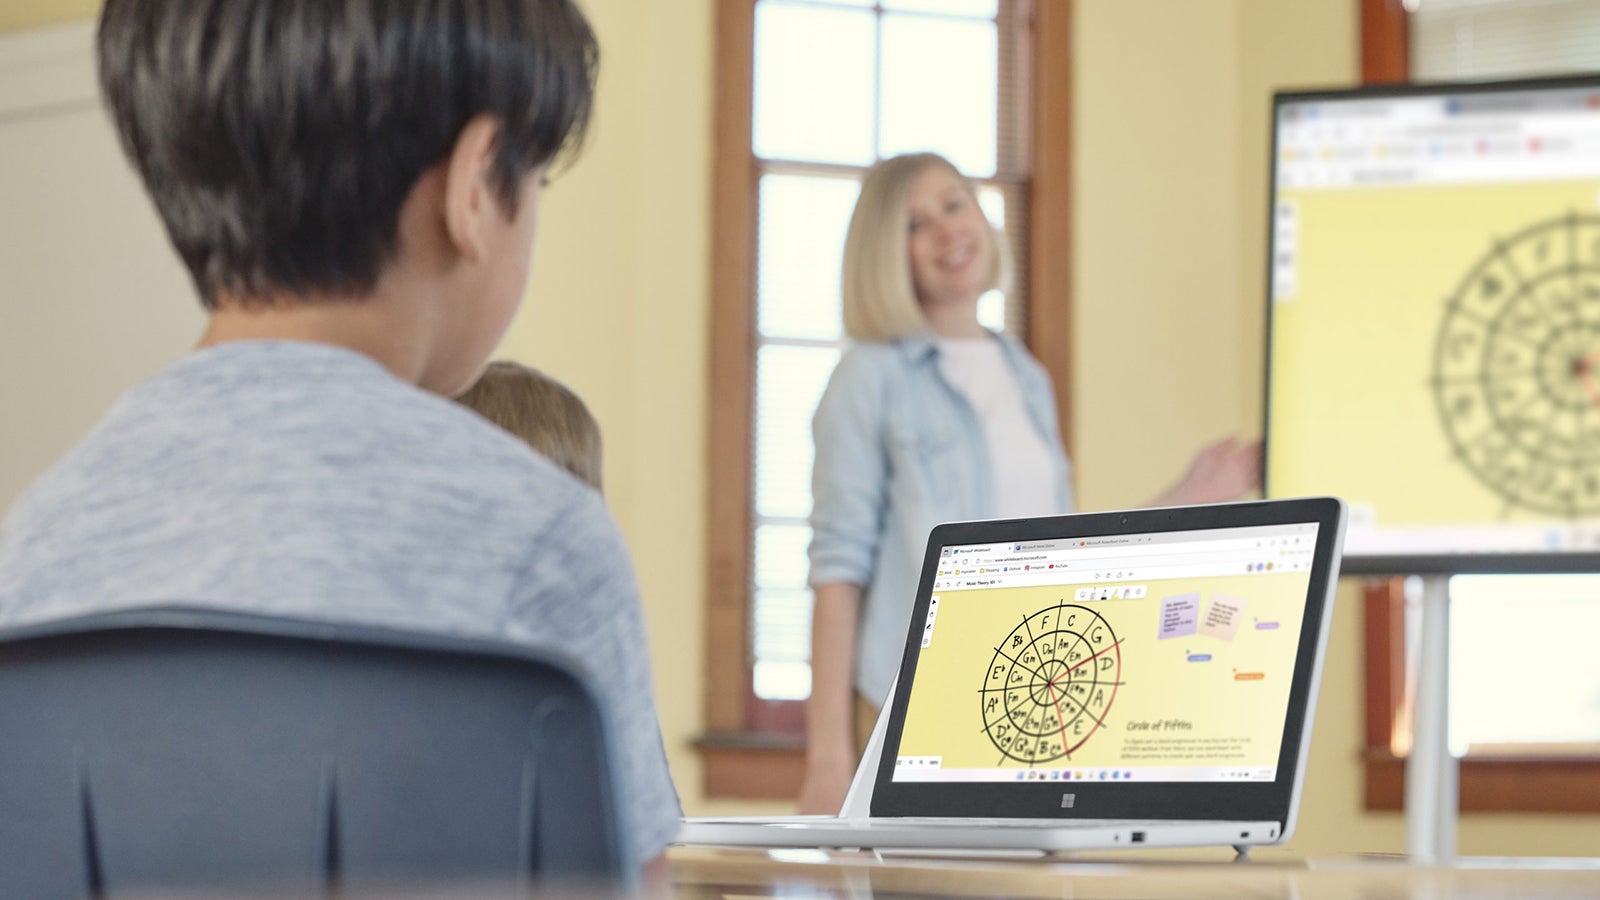 Windows 11 SE is designed for students and educators (Image: Microsoft)